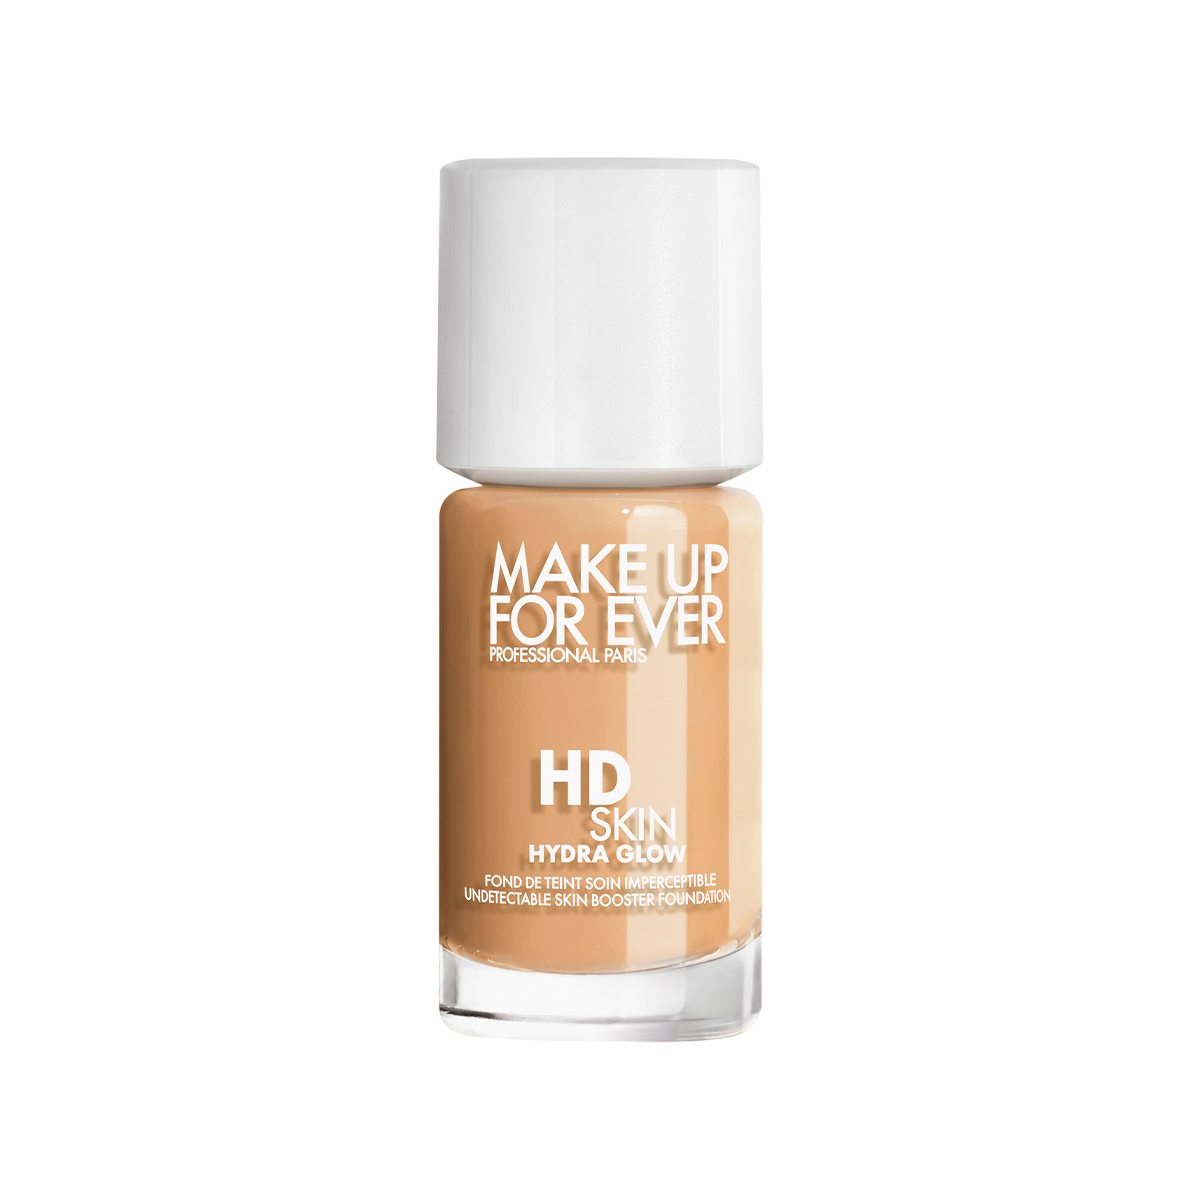 Shop Make Up For Ever Hd Skin Hydra Glow In Sand